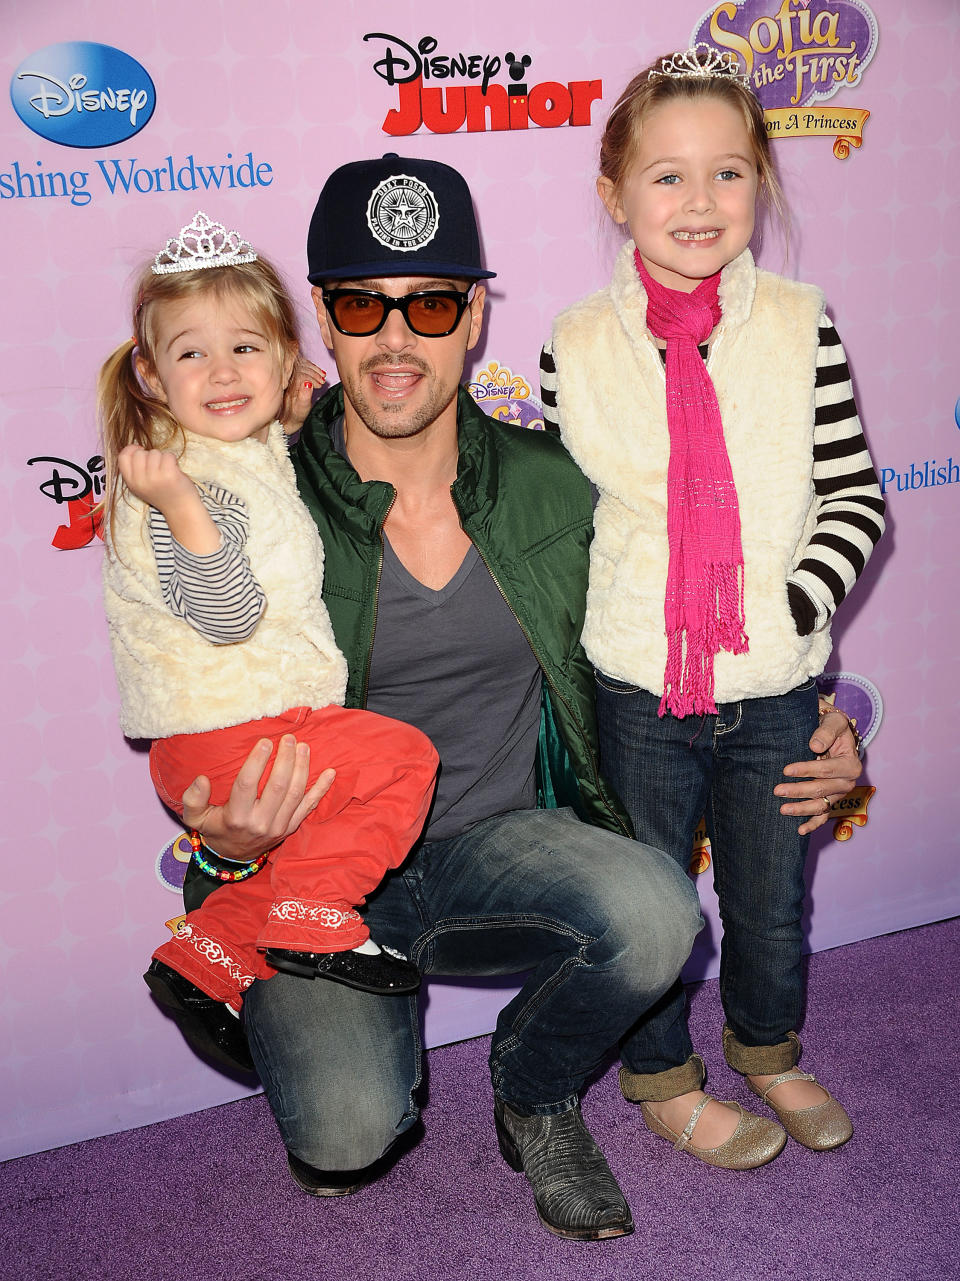 BURBANK, CA - NOVEMBER 10:  Actor Joey Lawrence and daughters Liberty Grace Lawrence (L) and Charleston Lawrence (R) attend the premiere of "Sofia The First: Once Upon a Princess" at Walt Disney Studios on November 10, 2012 in Burbank, California.  (Photo by Jason LaVeris/FilmMagic)